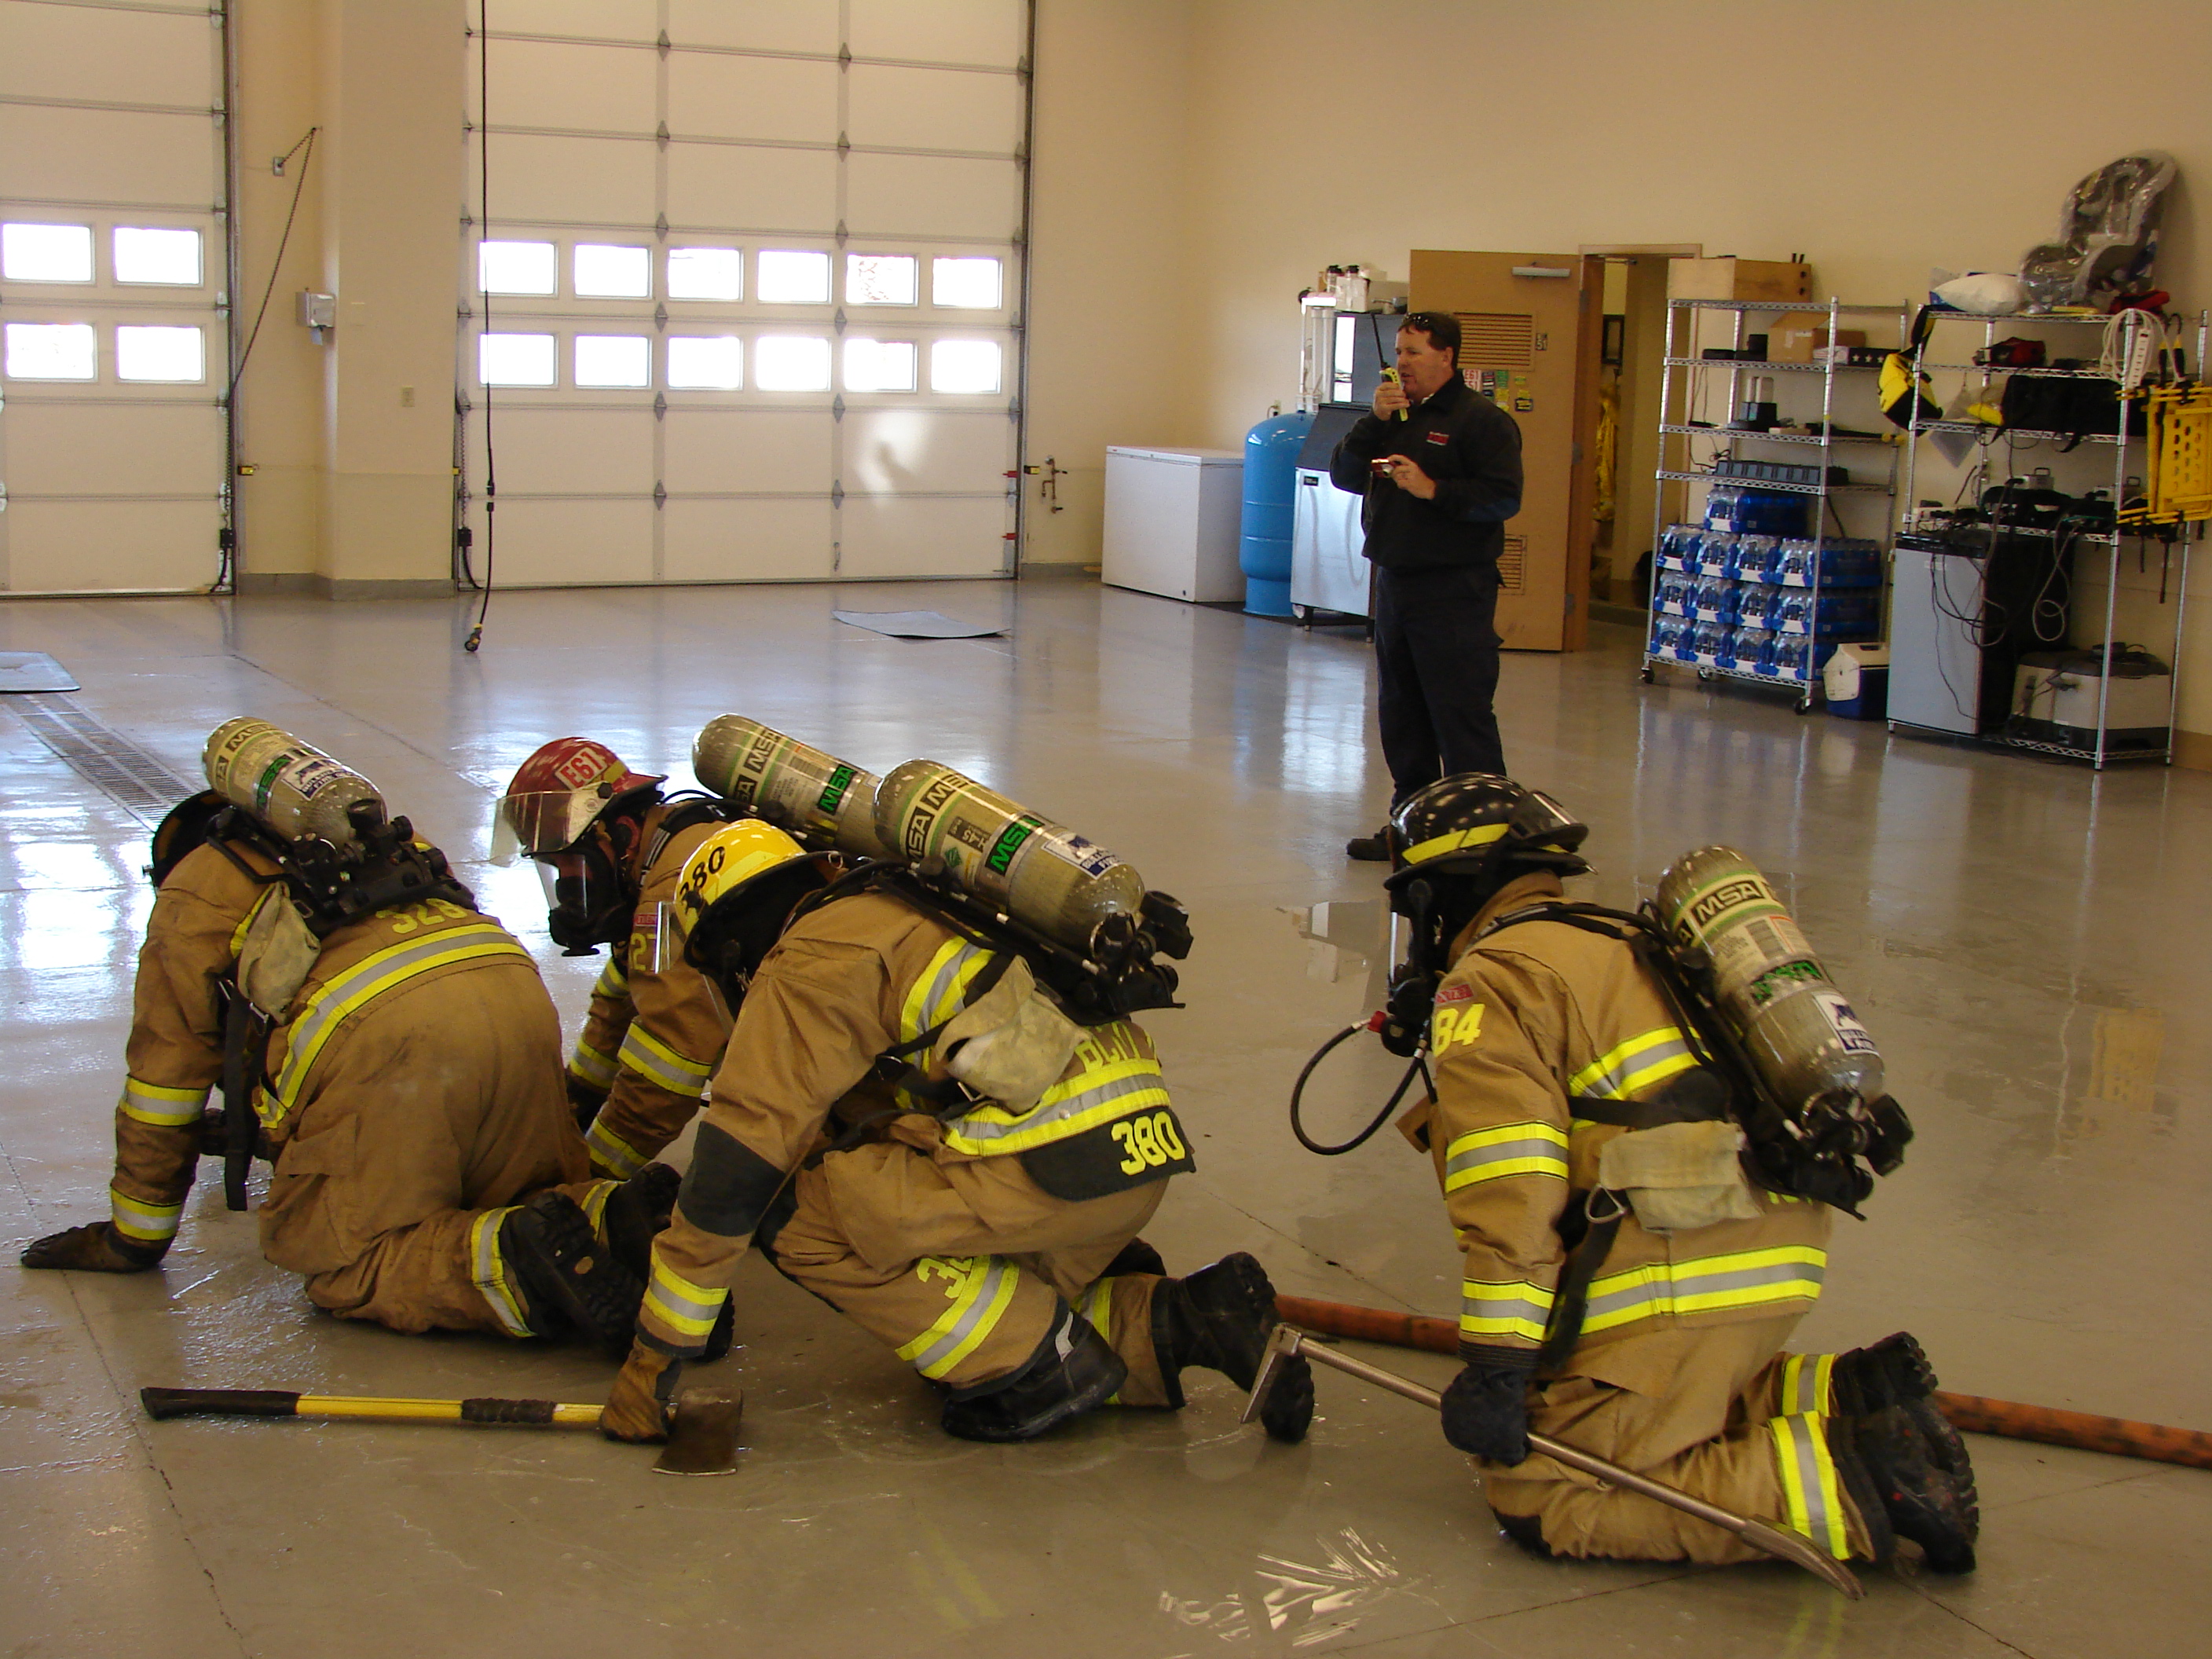 Firefighter Training Session | West Coast 911